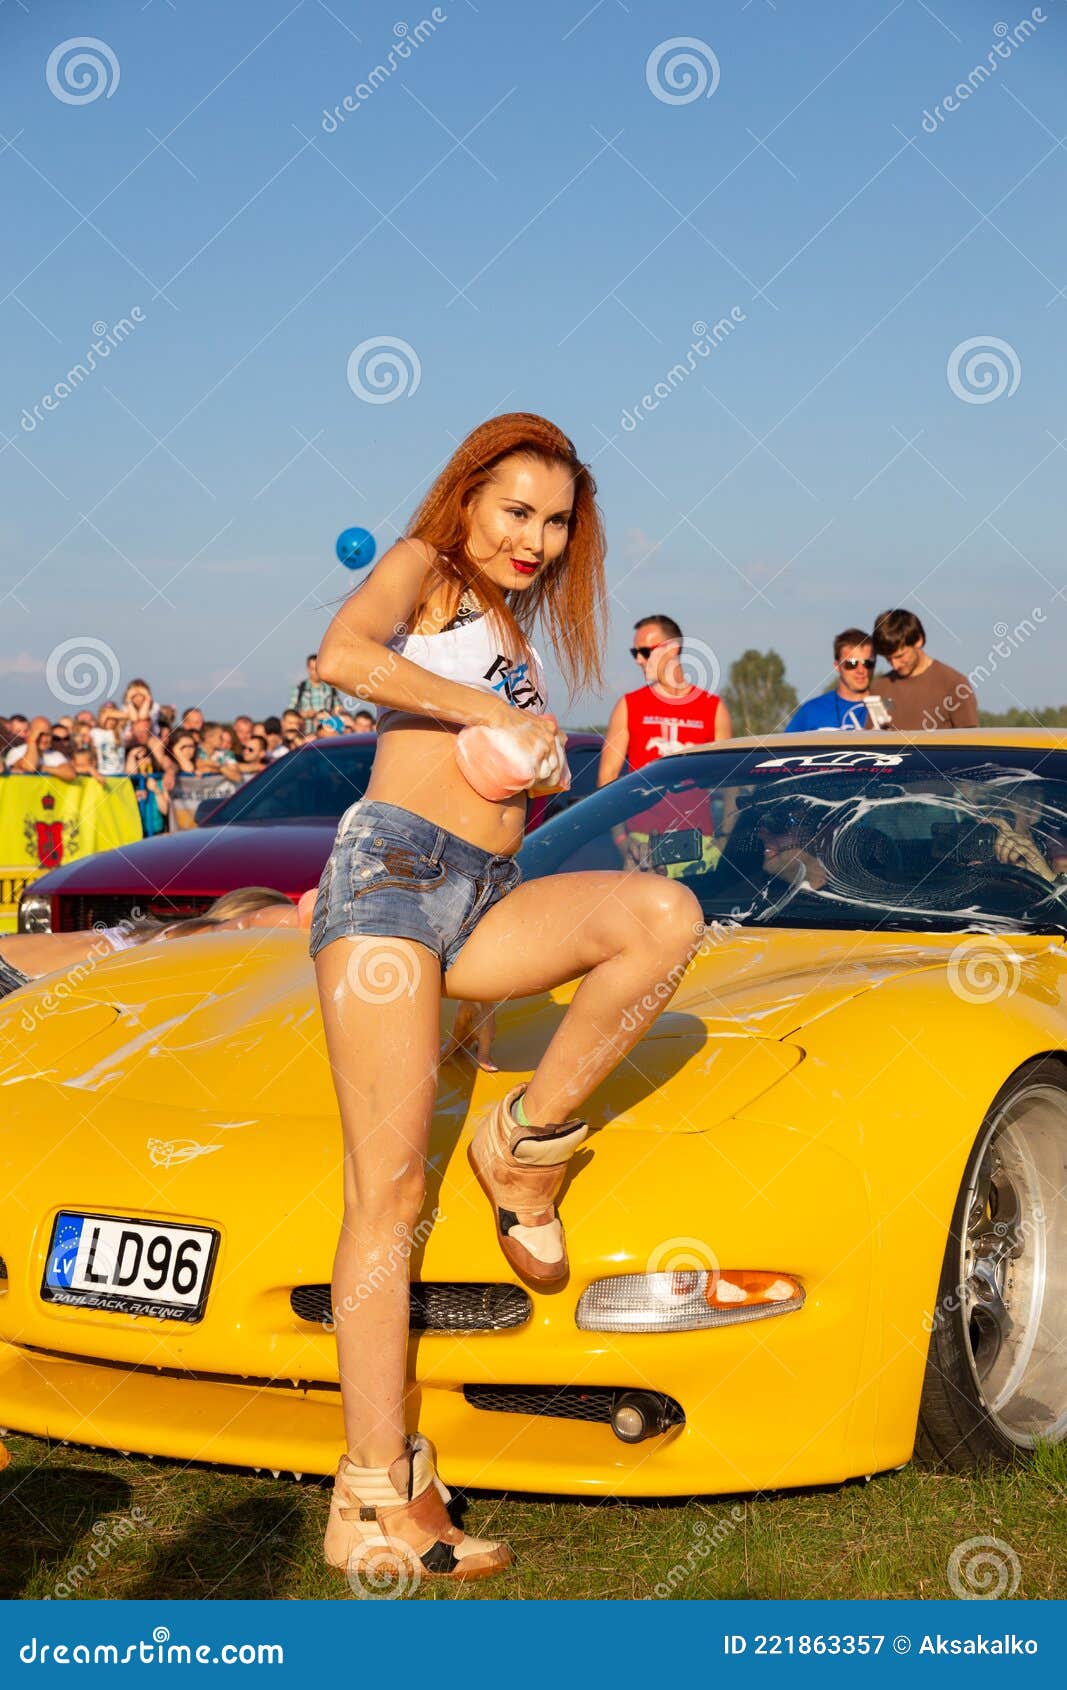 nake girls with race cars